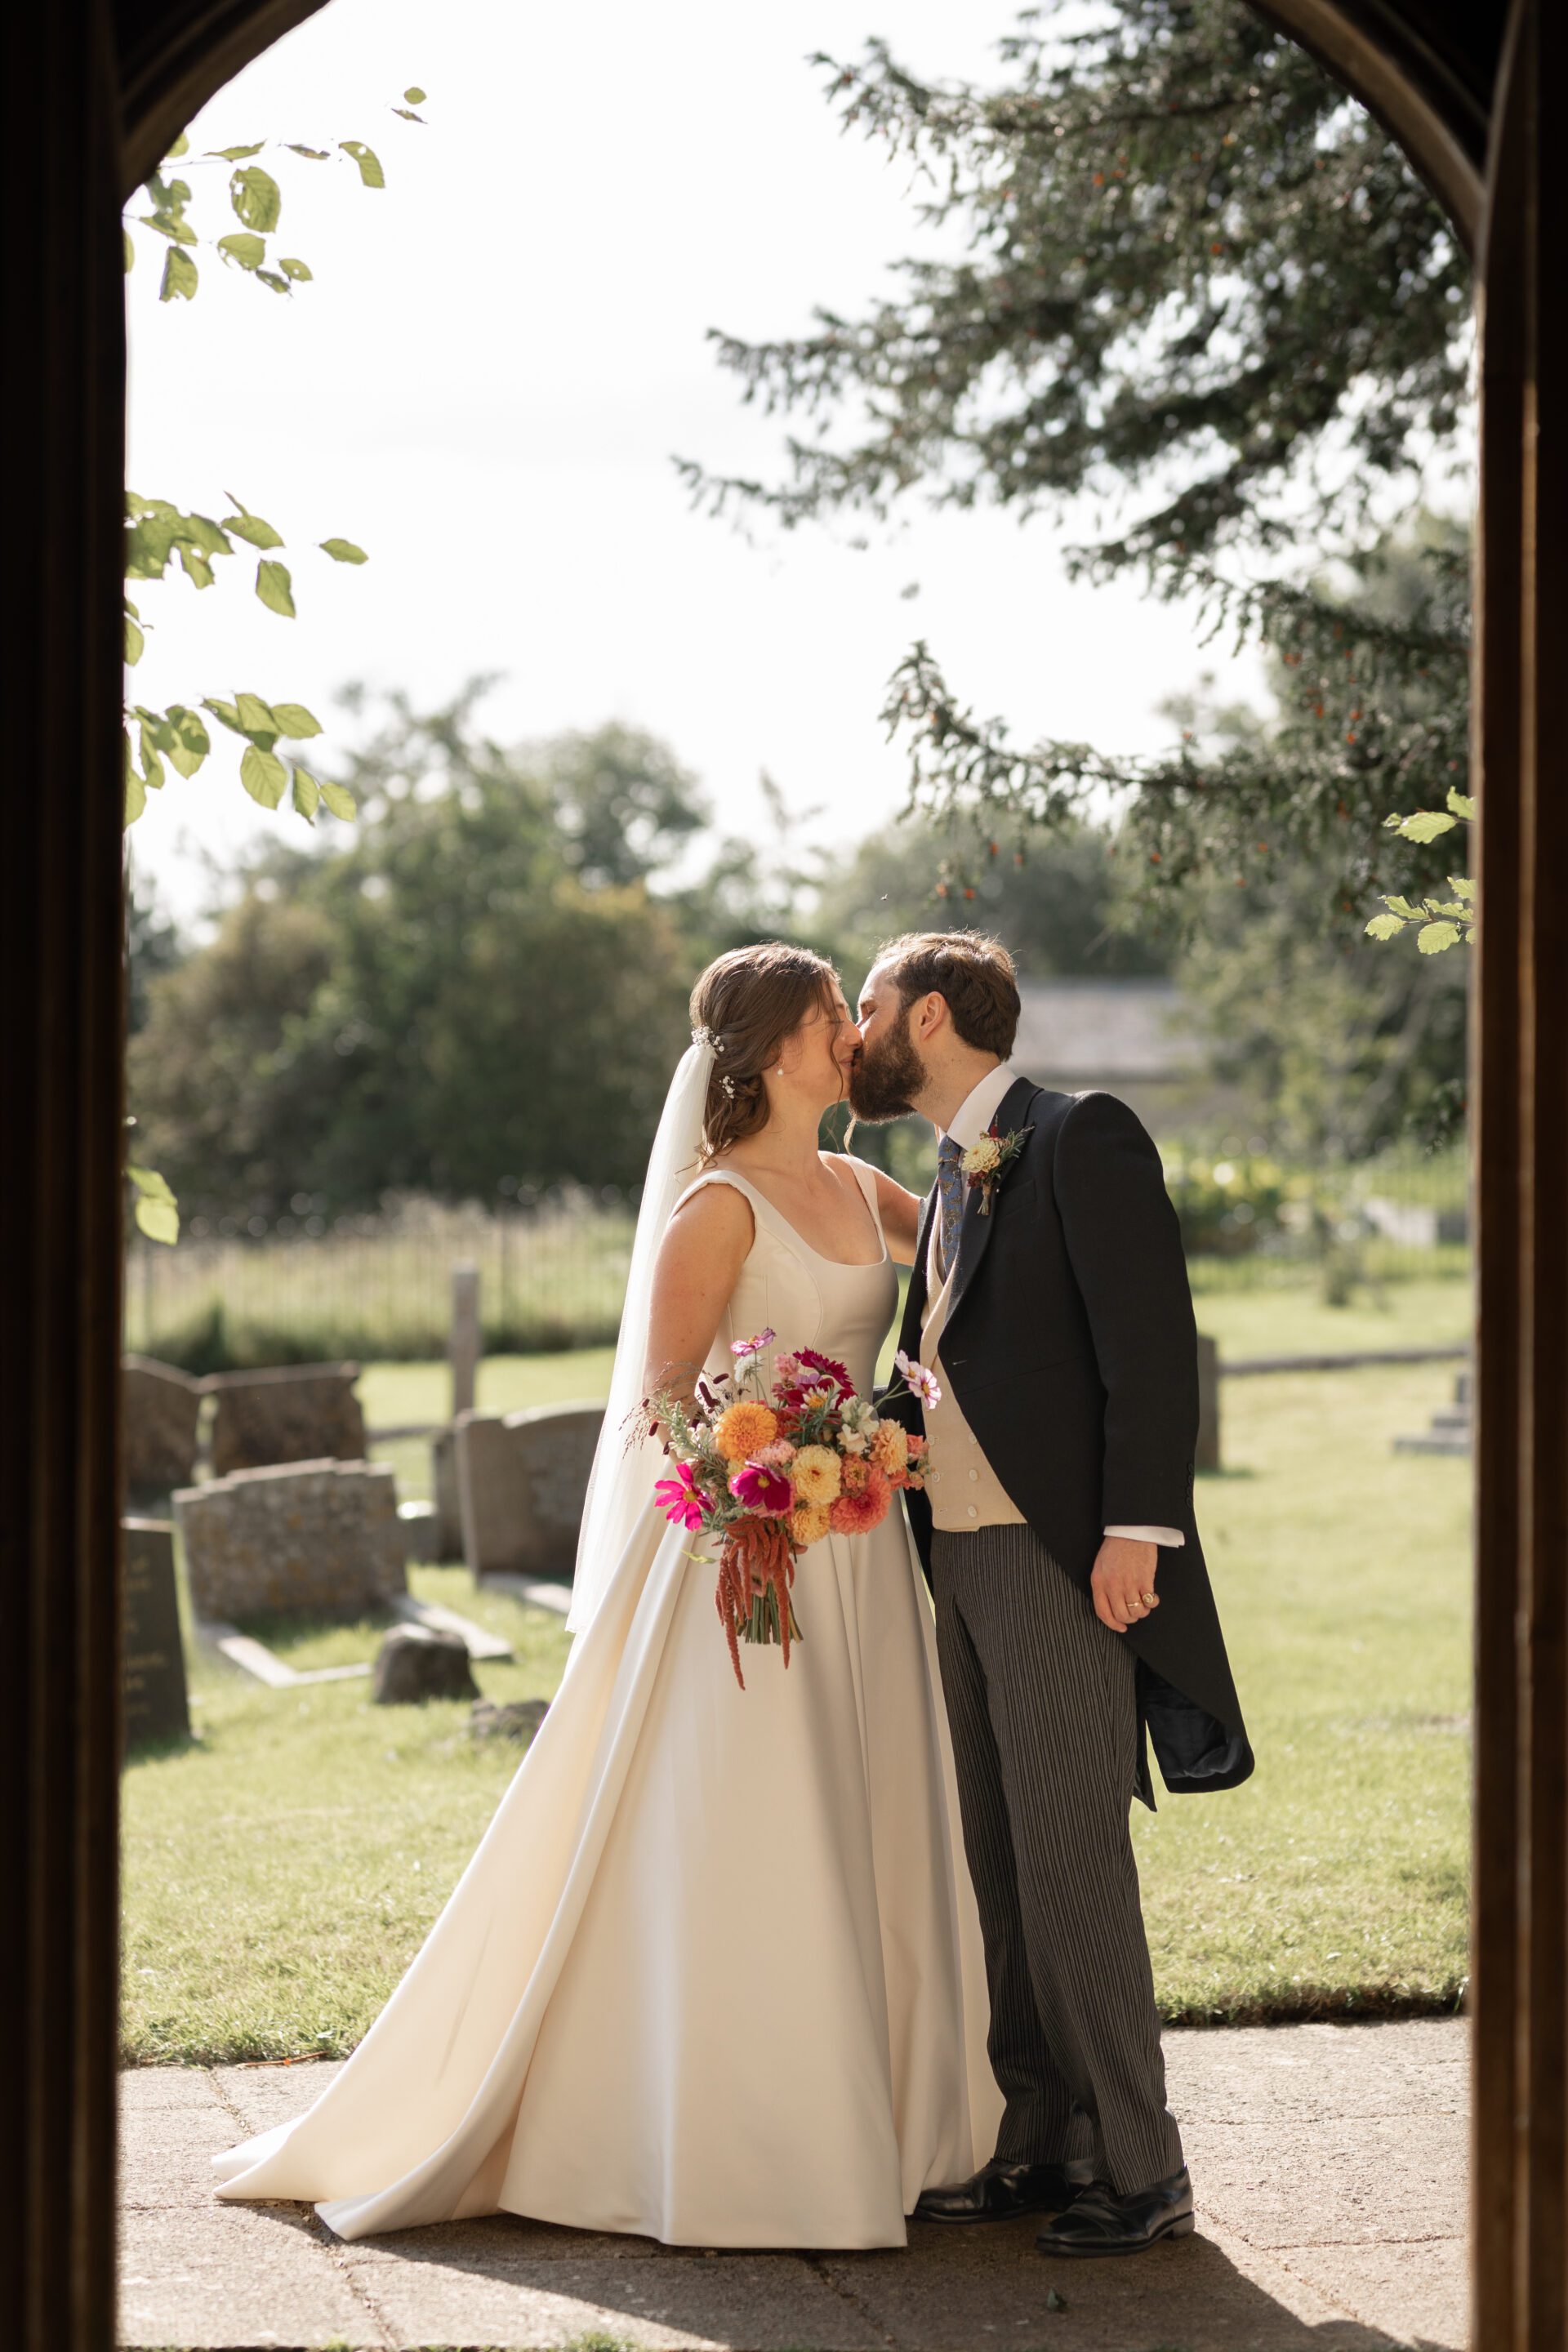 The bride and groom share a kiss after their after their Somerset church wedding ceremony